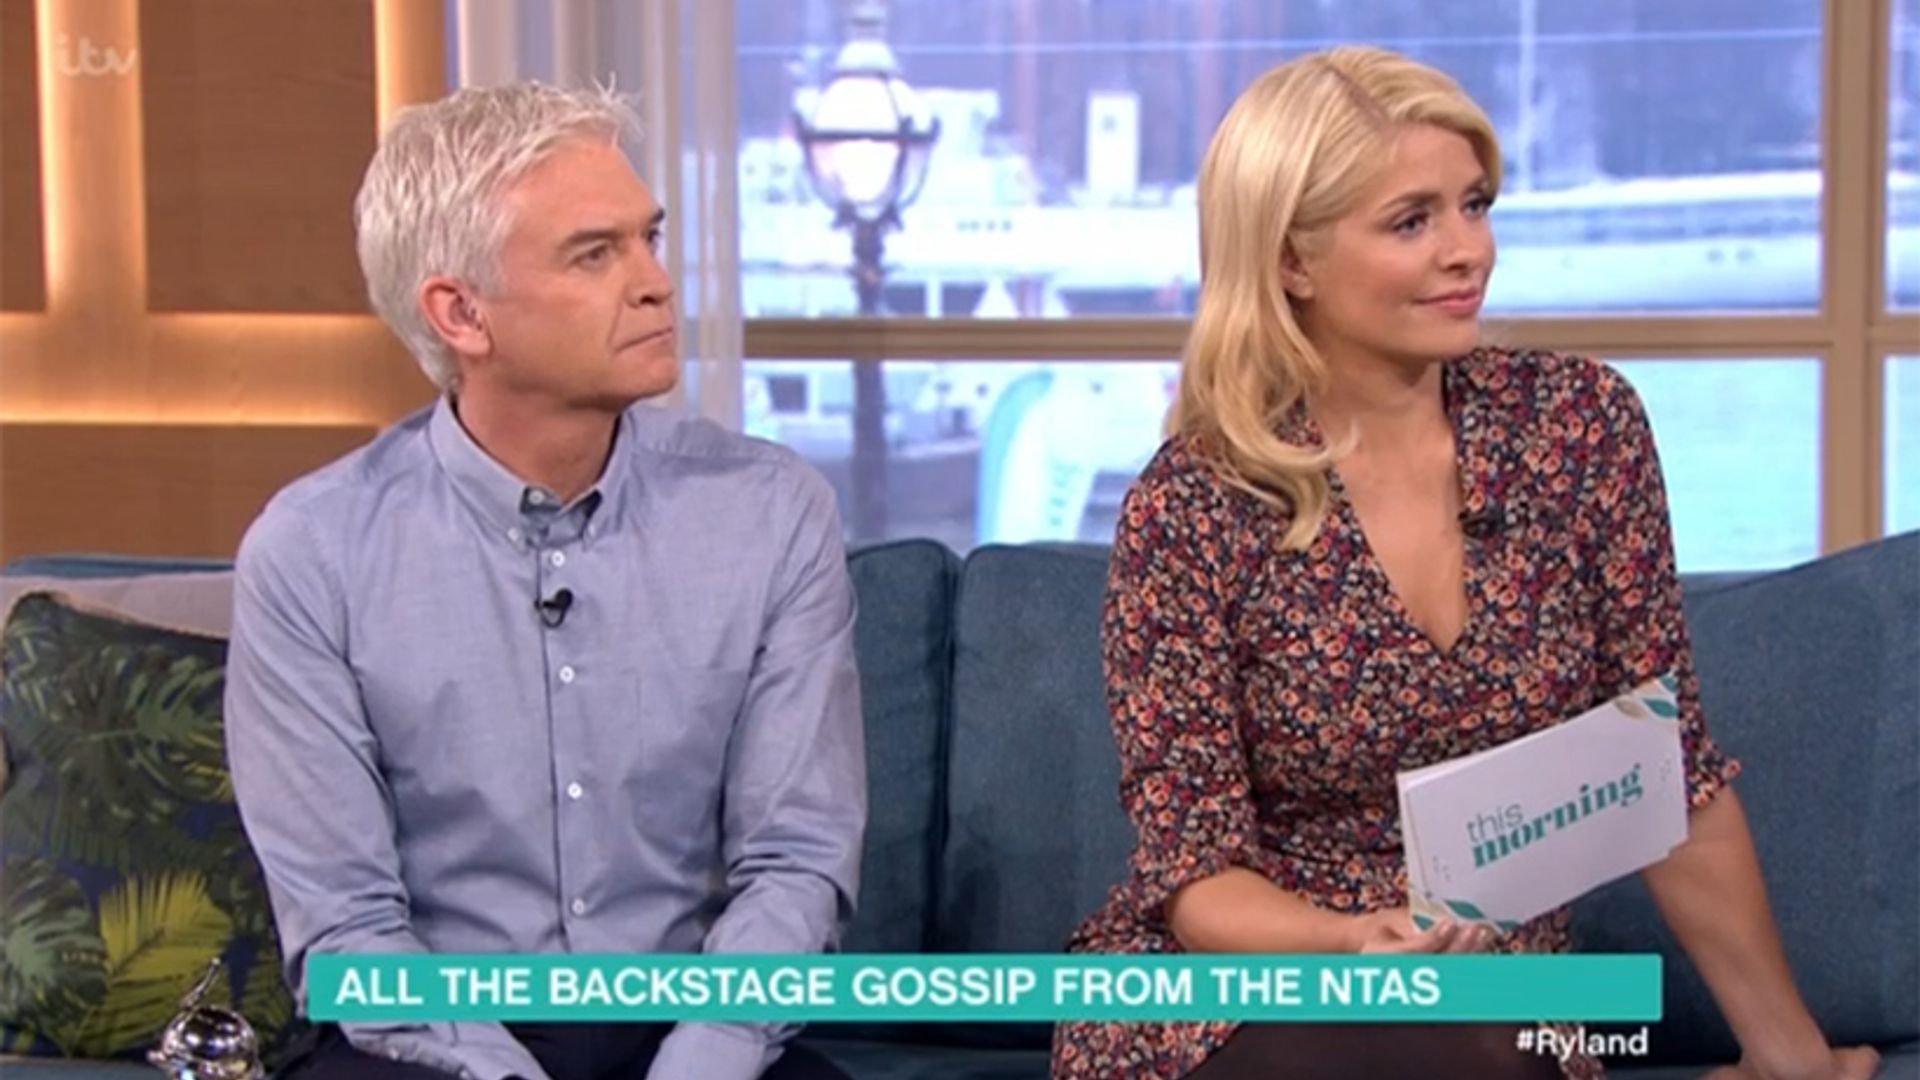 Holly Willoughby and Phillip Schofield struggle on This Morning after the NTAs